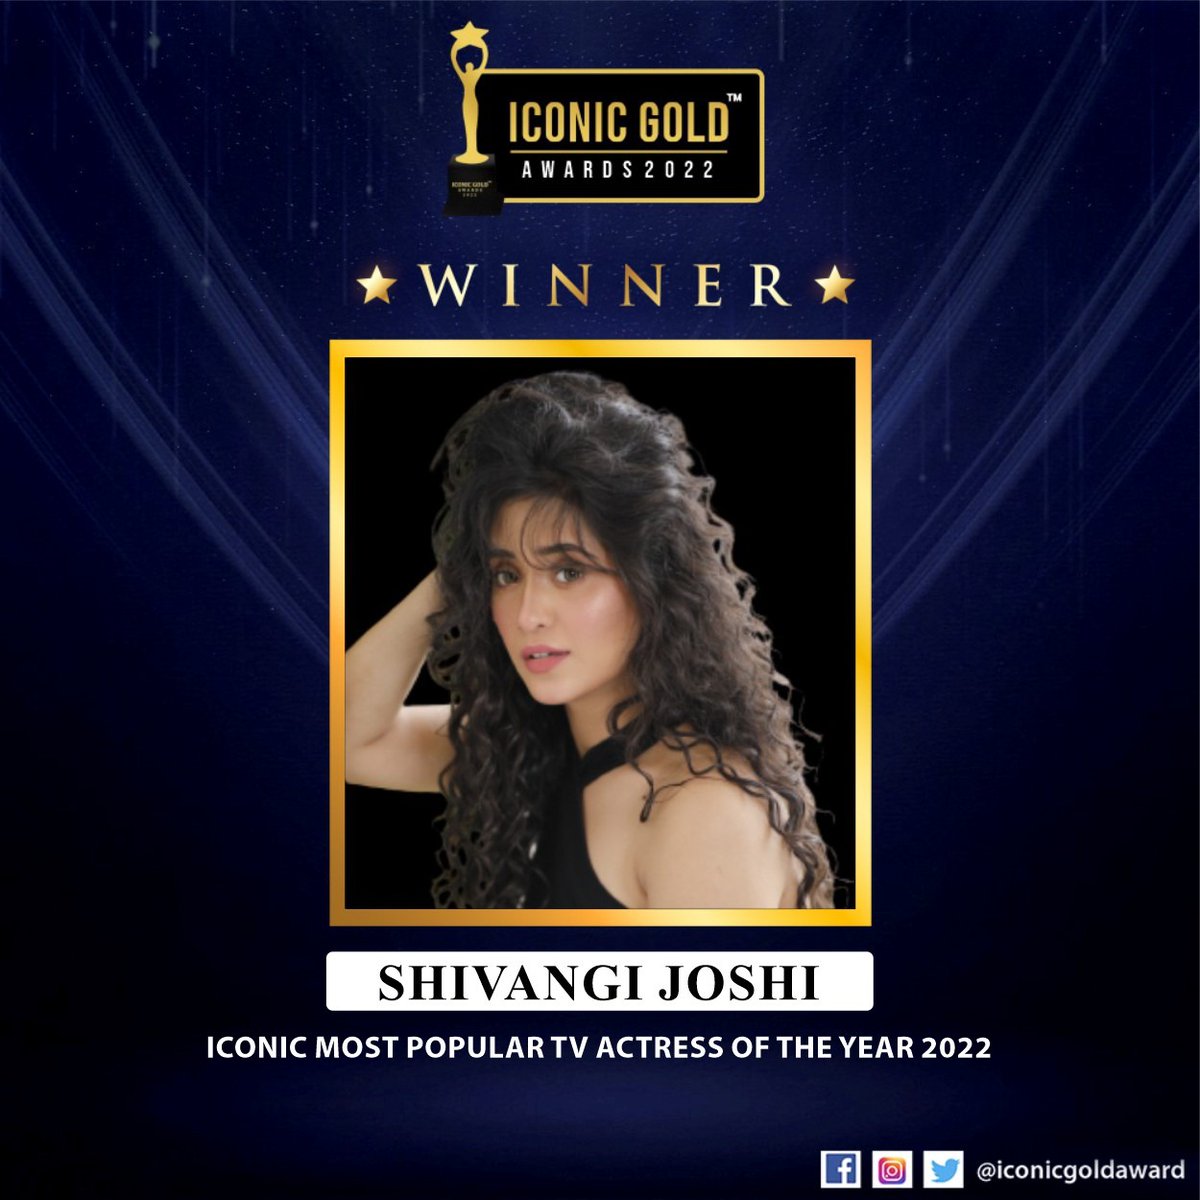 We feel extremely happy to announce that @shivangijoshi10 has won the Iconic Most Popular Tv Actress of the Year 2022. Our Heartiest Congratulations to you. It's an honor to felicitate you with this prestigious award at the #iconicgoldawards2022